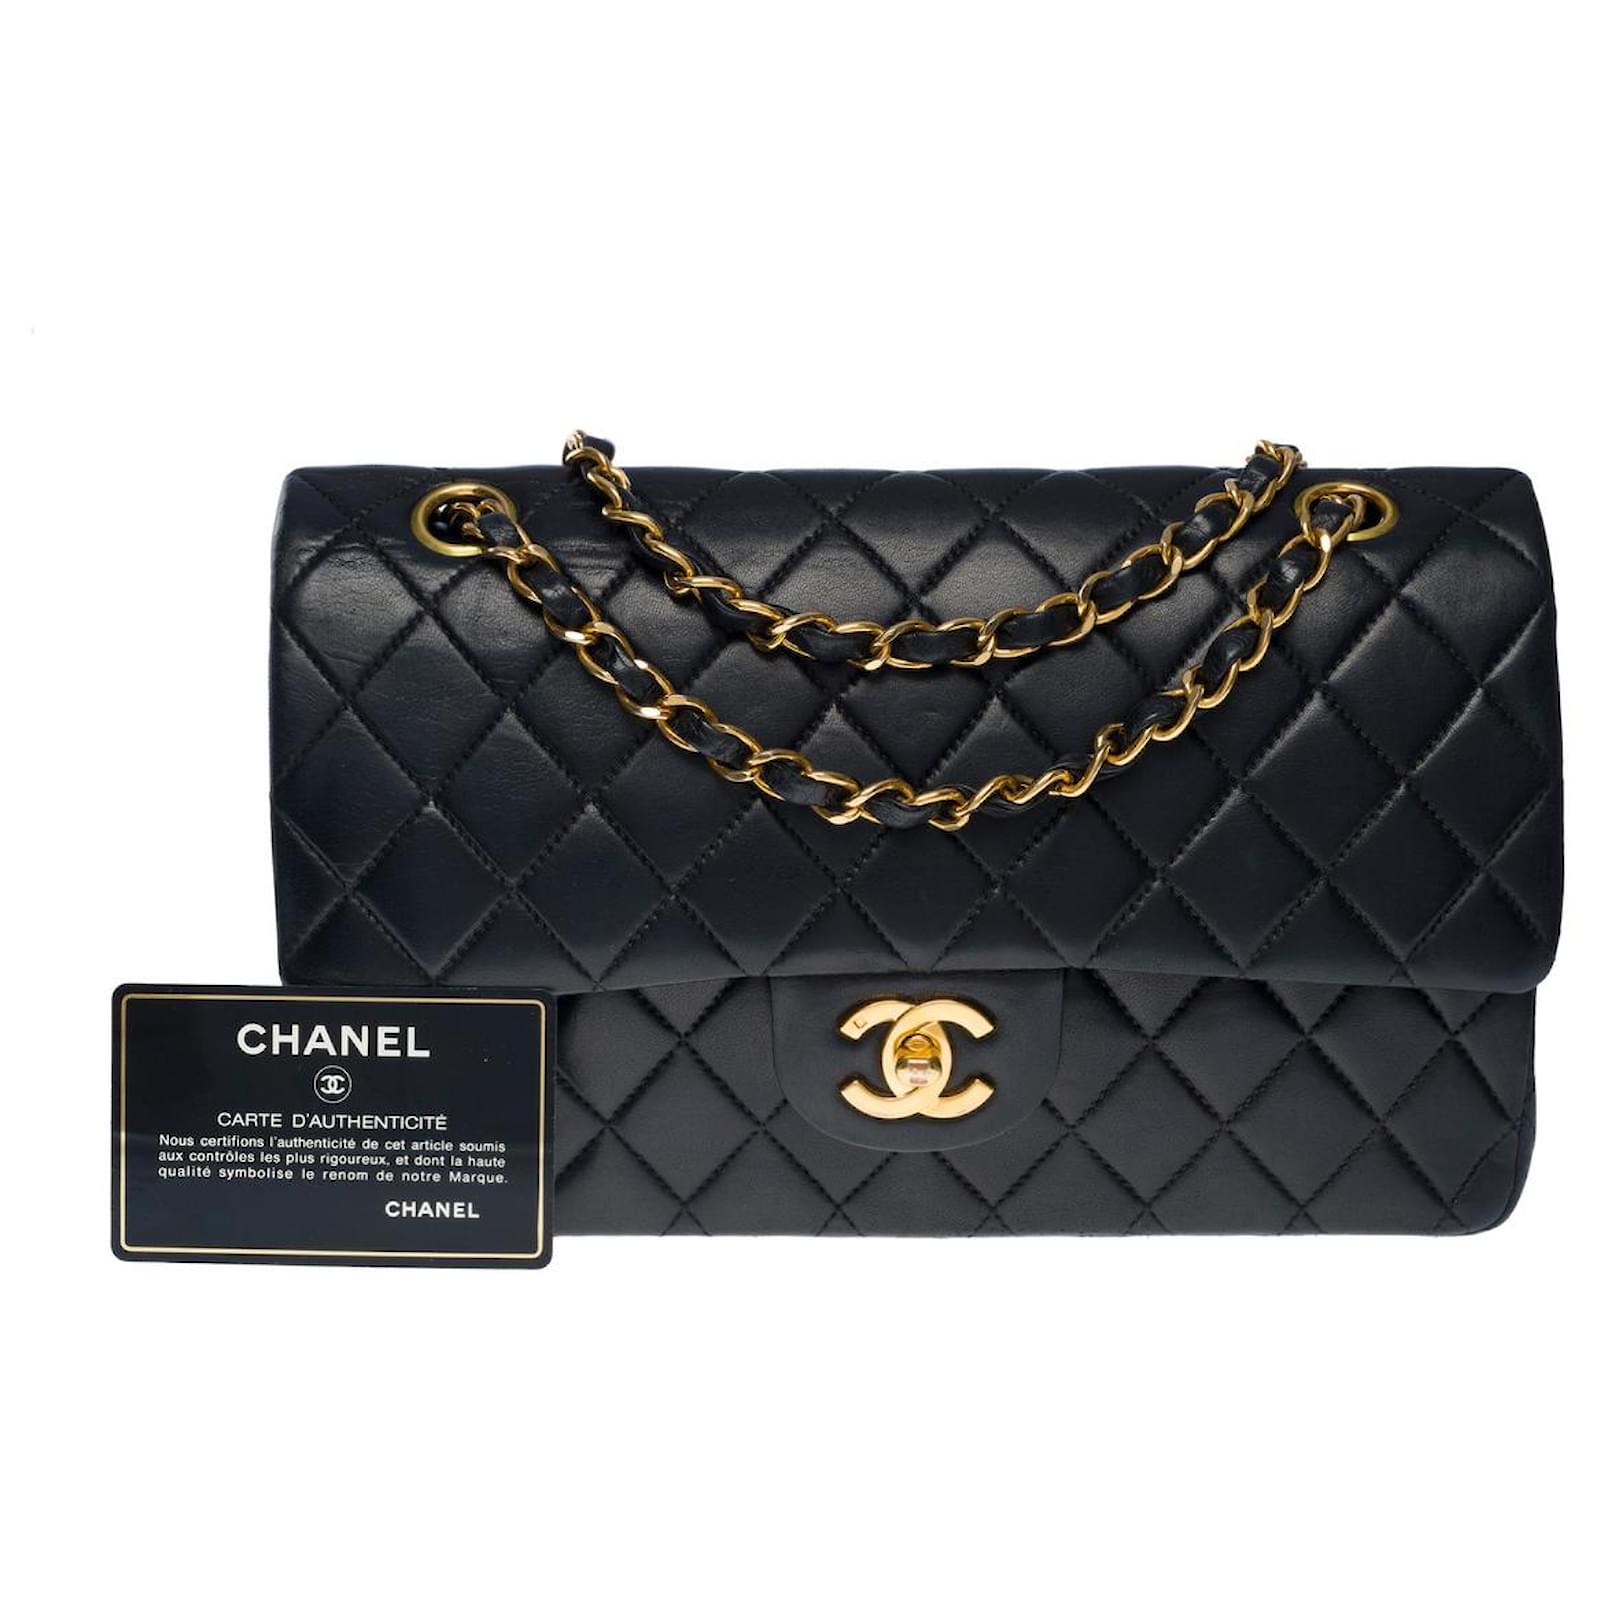 Sac Chanel Timeless/classic black leather - 101132 ref.857054